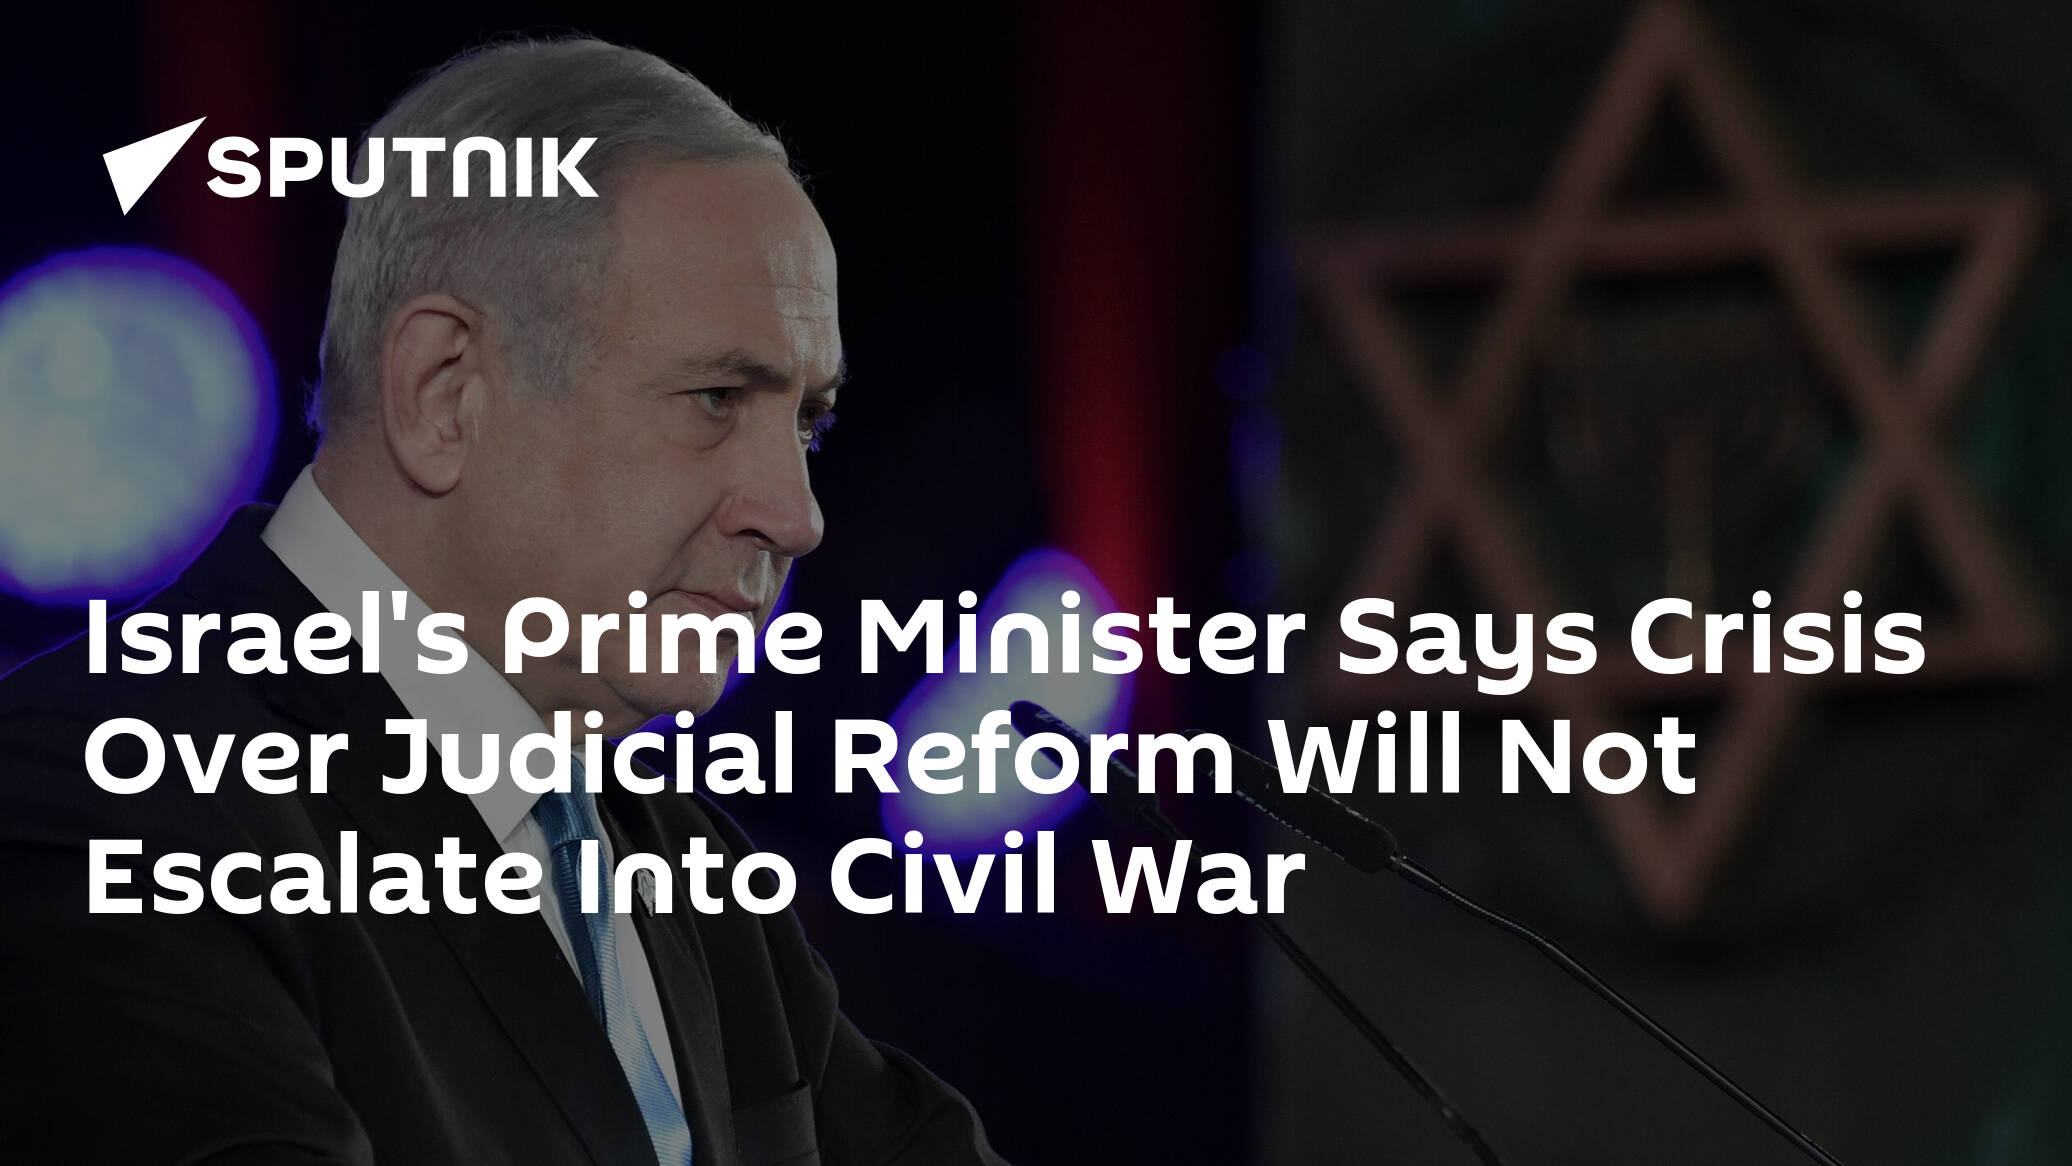 Israel's Prime Minister Says Crisis Over Judicial Reform Will Not Escalate Into Civil War